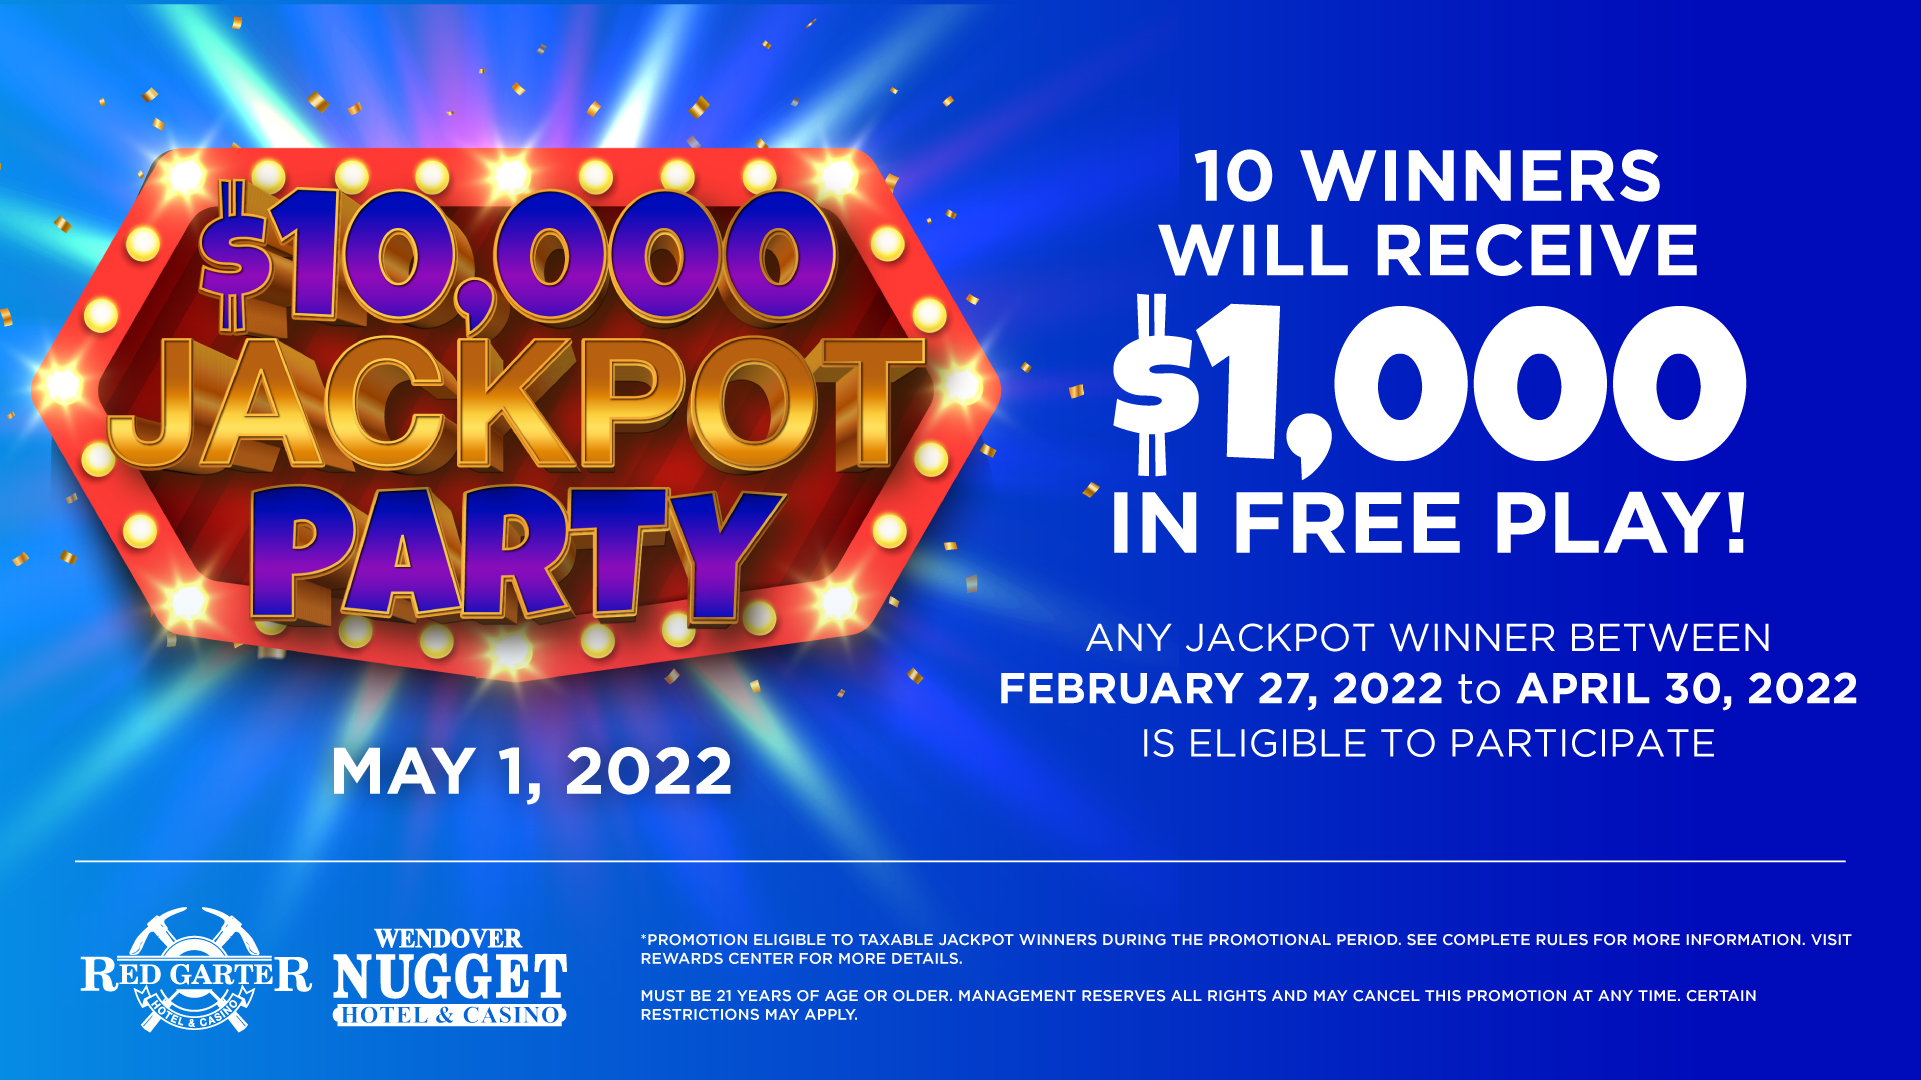 $10,000 Jackpot Party May 1st 10 Winners Will Receive $1,000 In Free Play! Any jackpot winner between February 27, 2022 to April 30, 2022 is eligible to participate